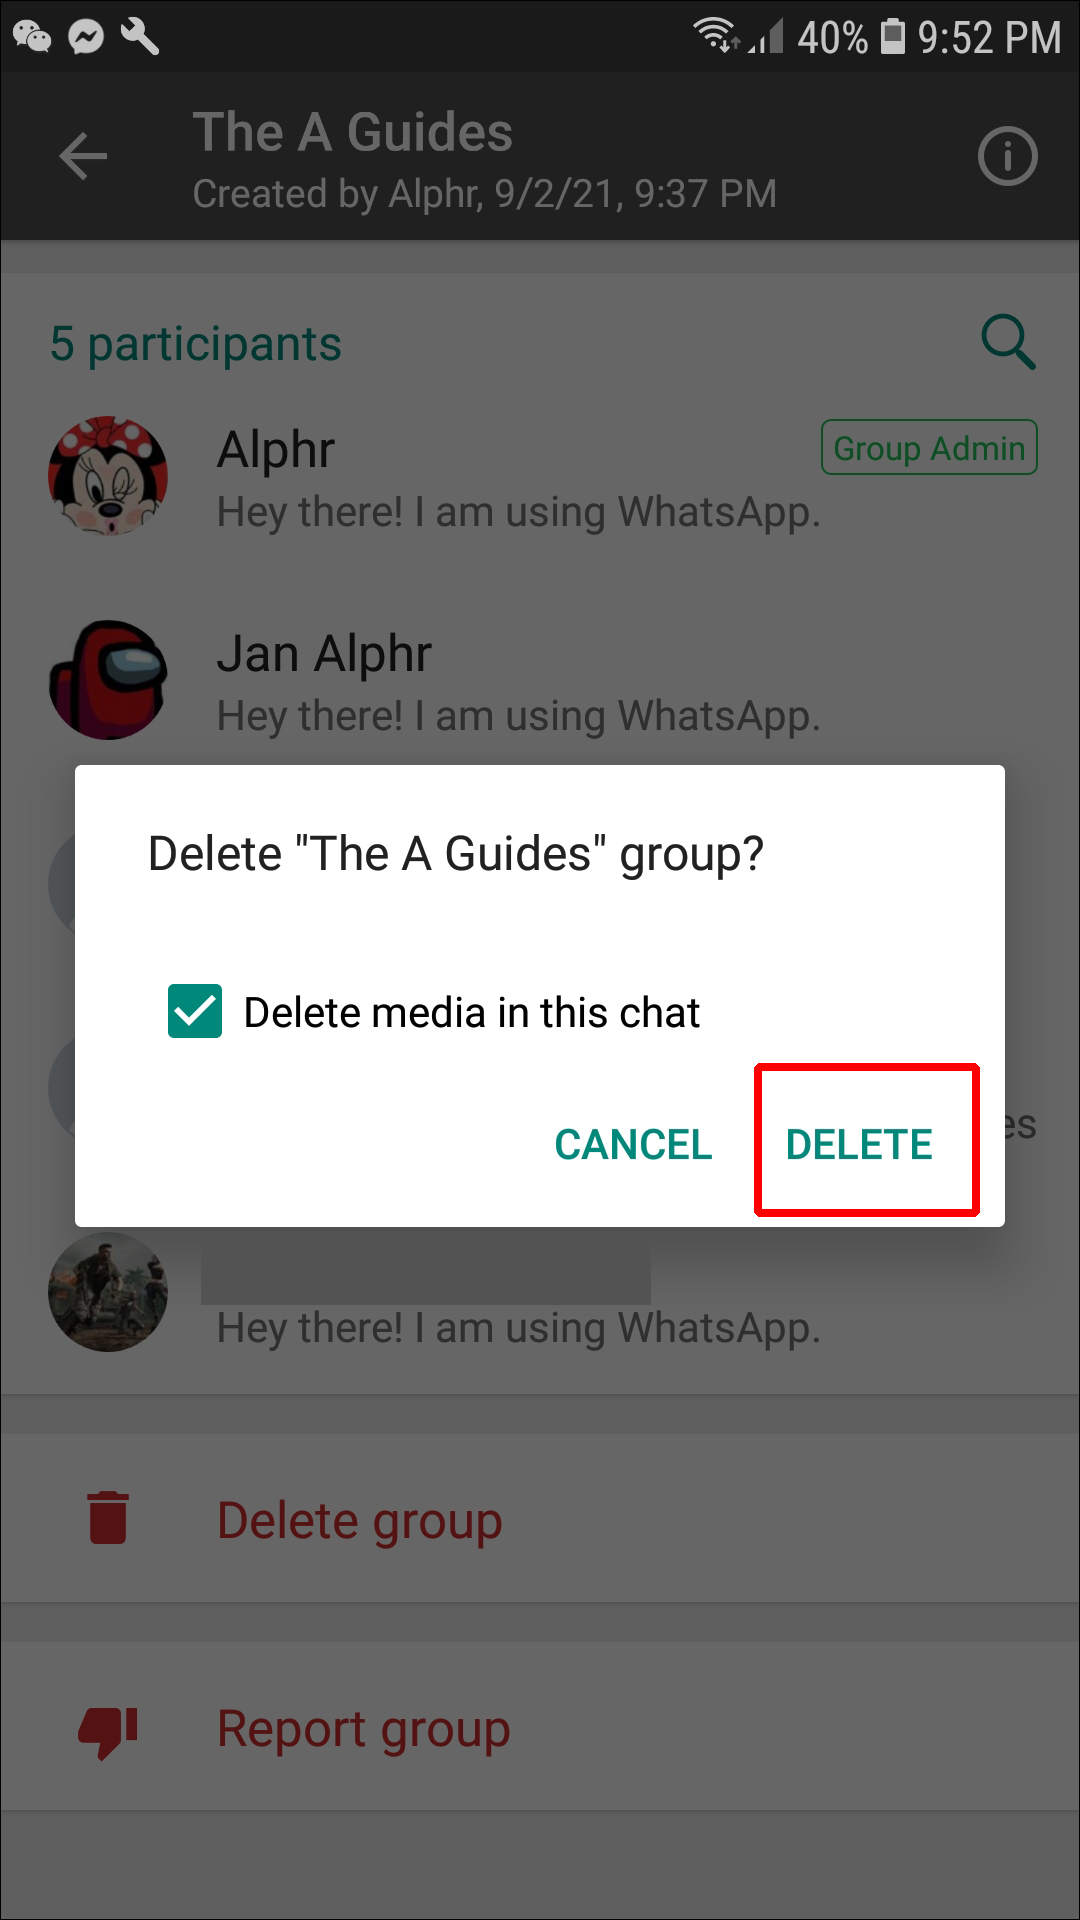 How to Delete a Group in WhatsApp